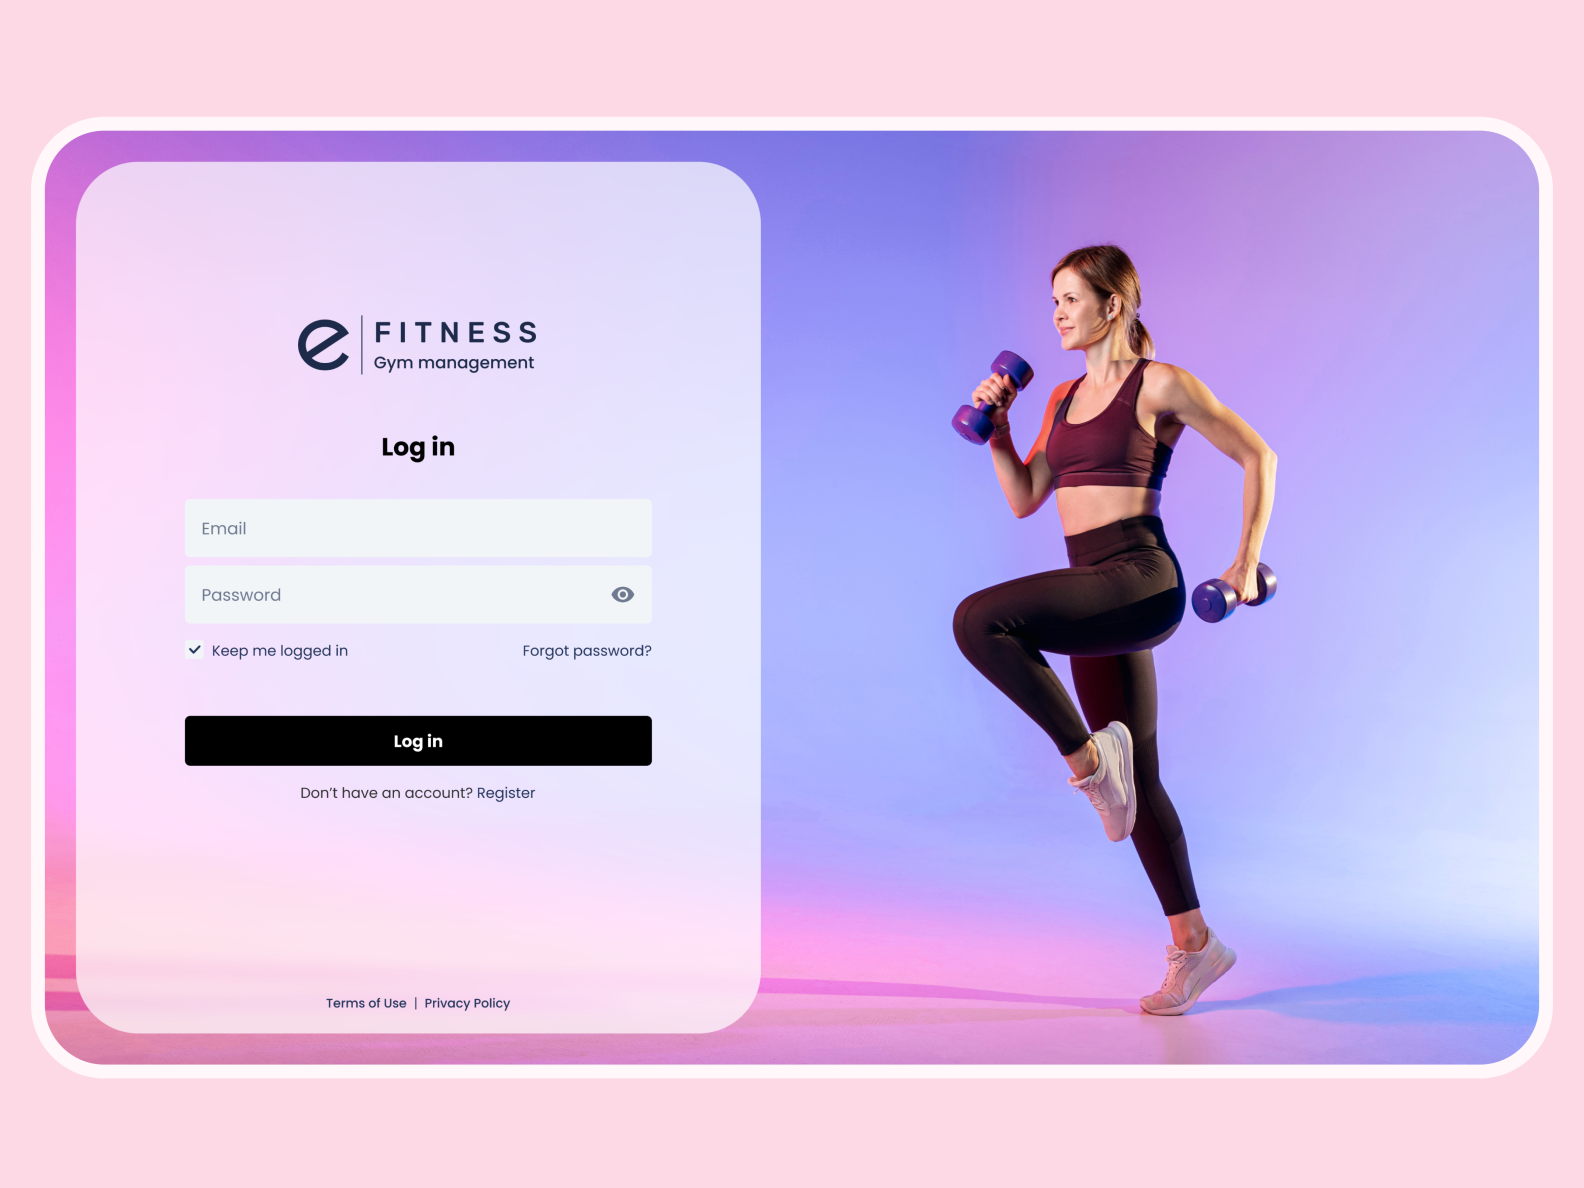 Login / Sign In E Fitness Gym Management System by Max Holub on Dribbble